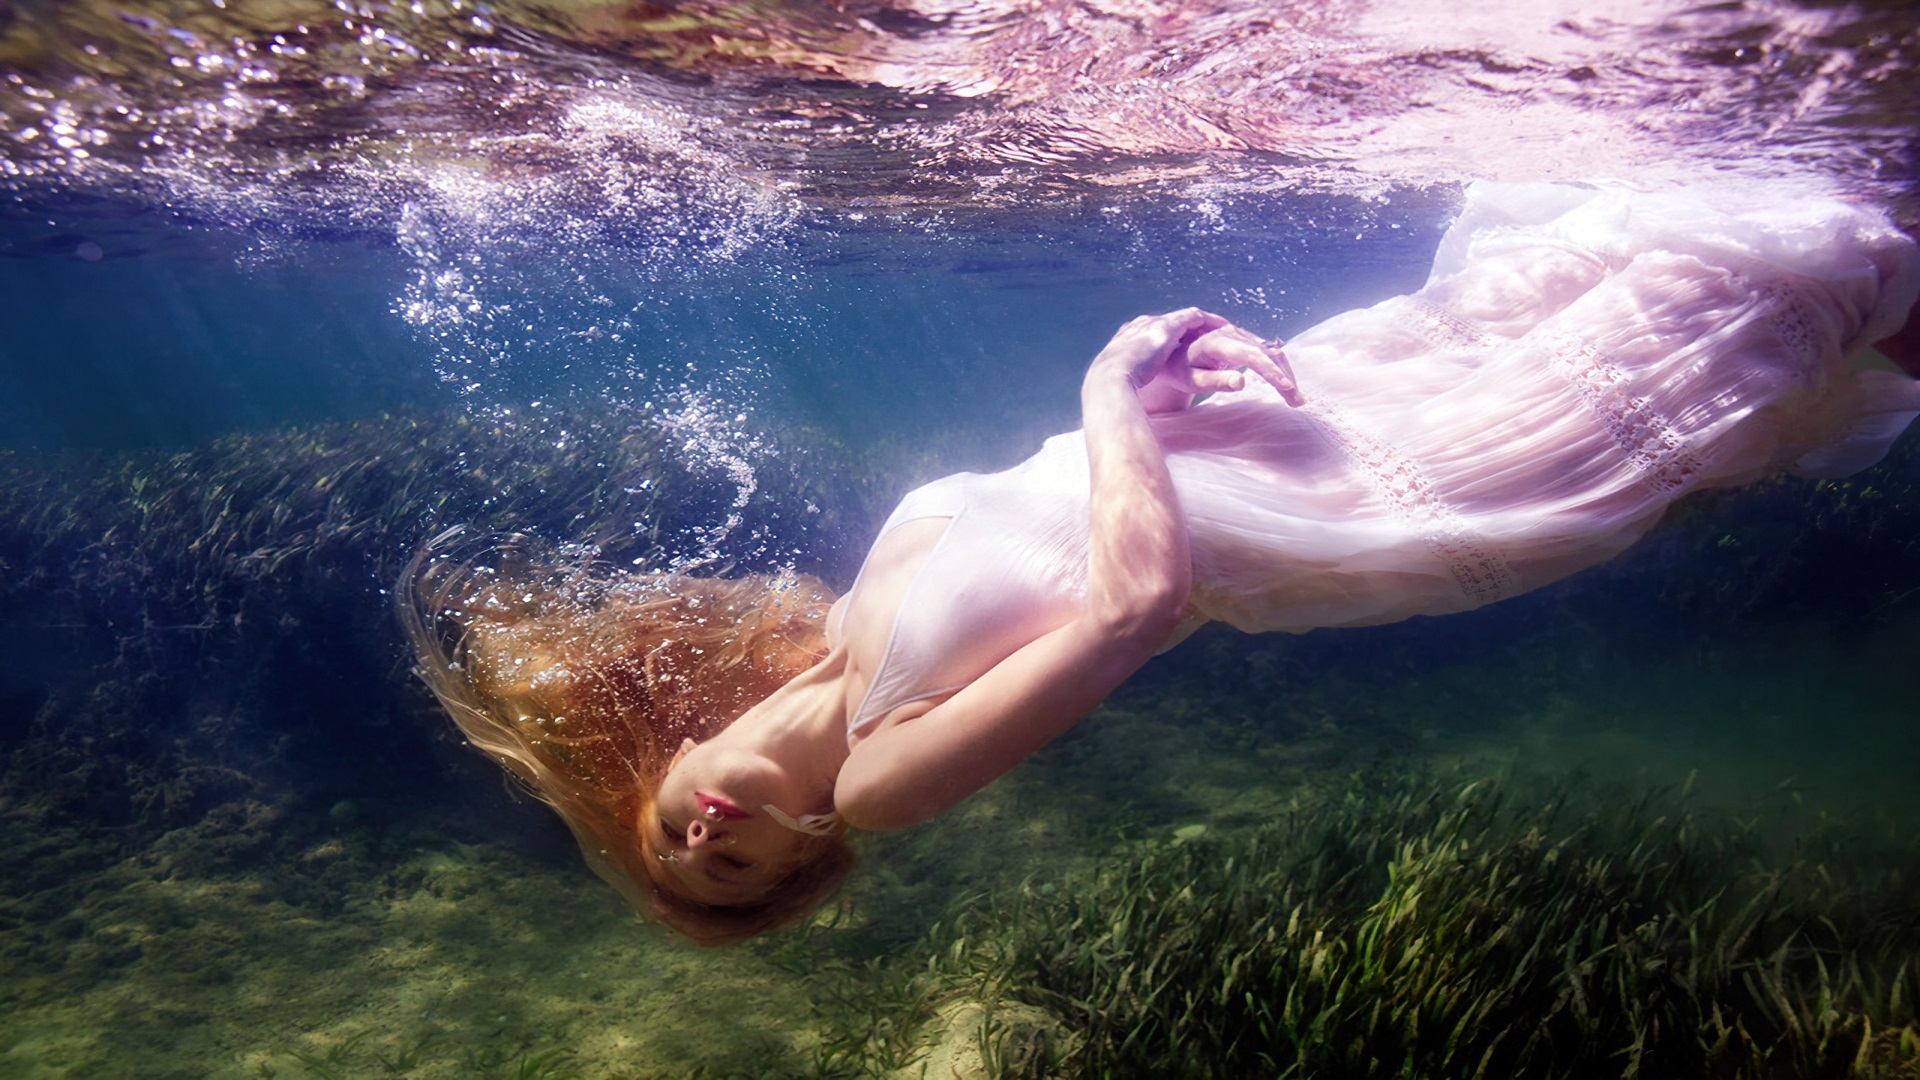 People 1920x1080 women underwater white dress blonde waves women outdoors nature outdoors bubbles open shirt nipples through clothing